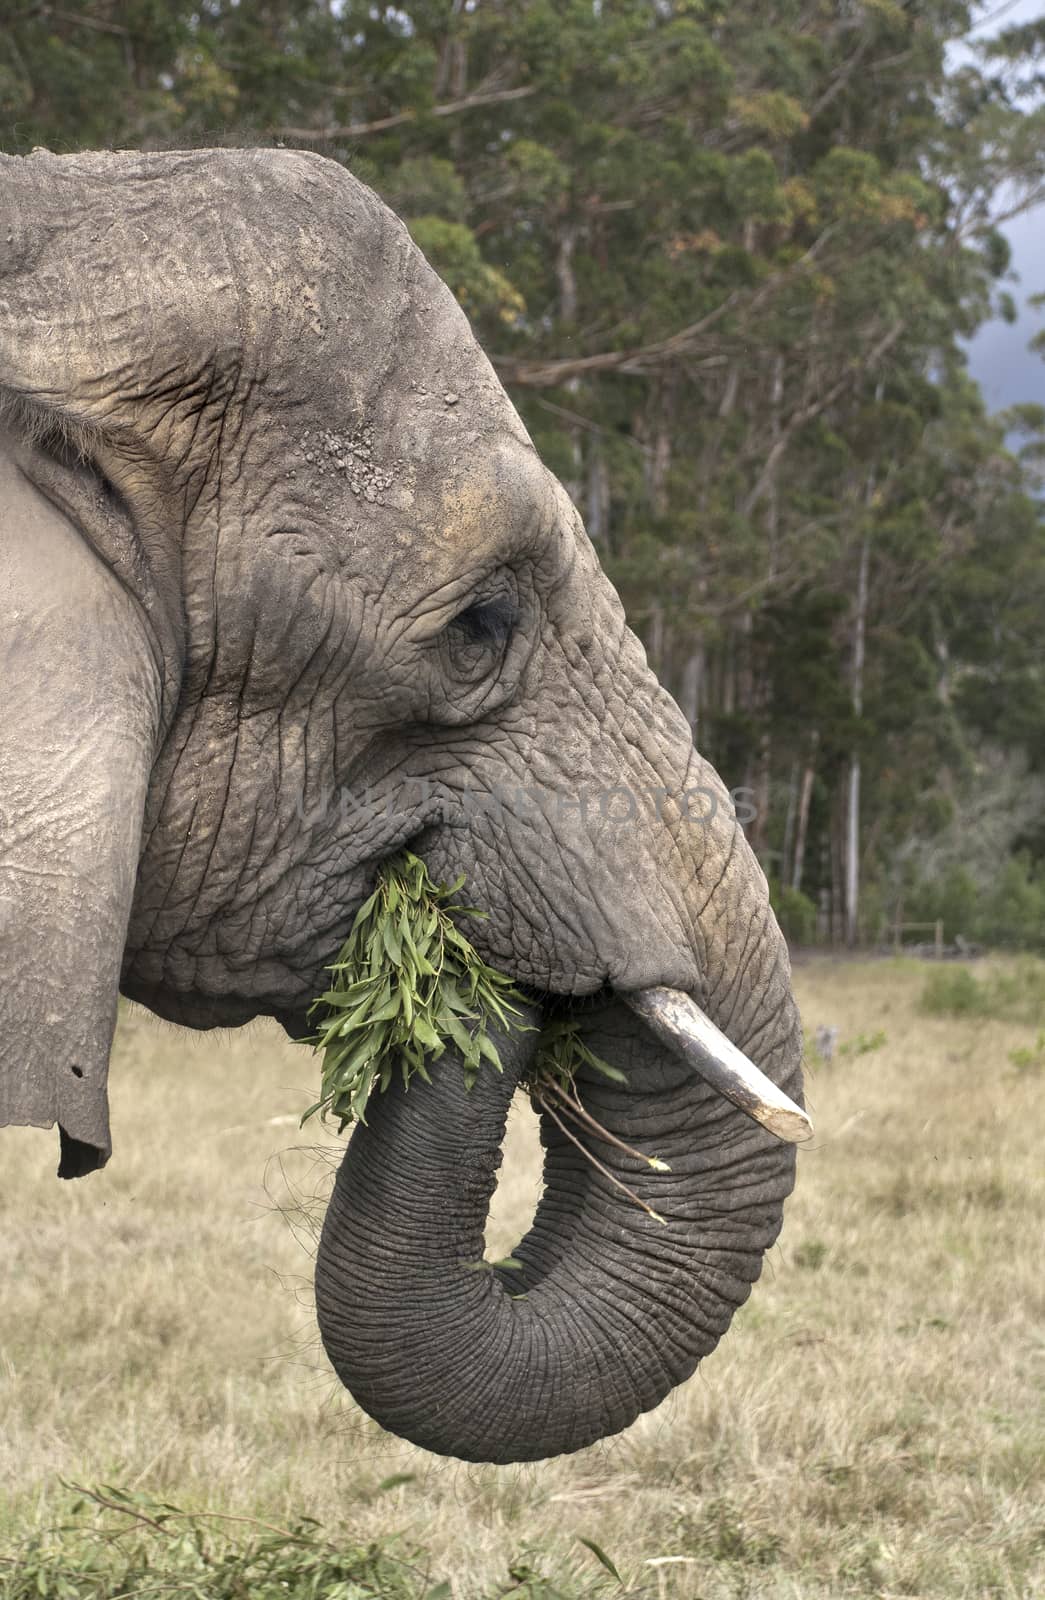 An elephant munches leaves in an elephant sanctuary in South Africa